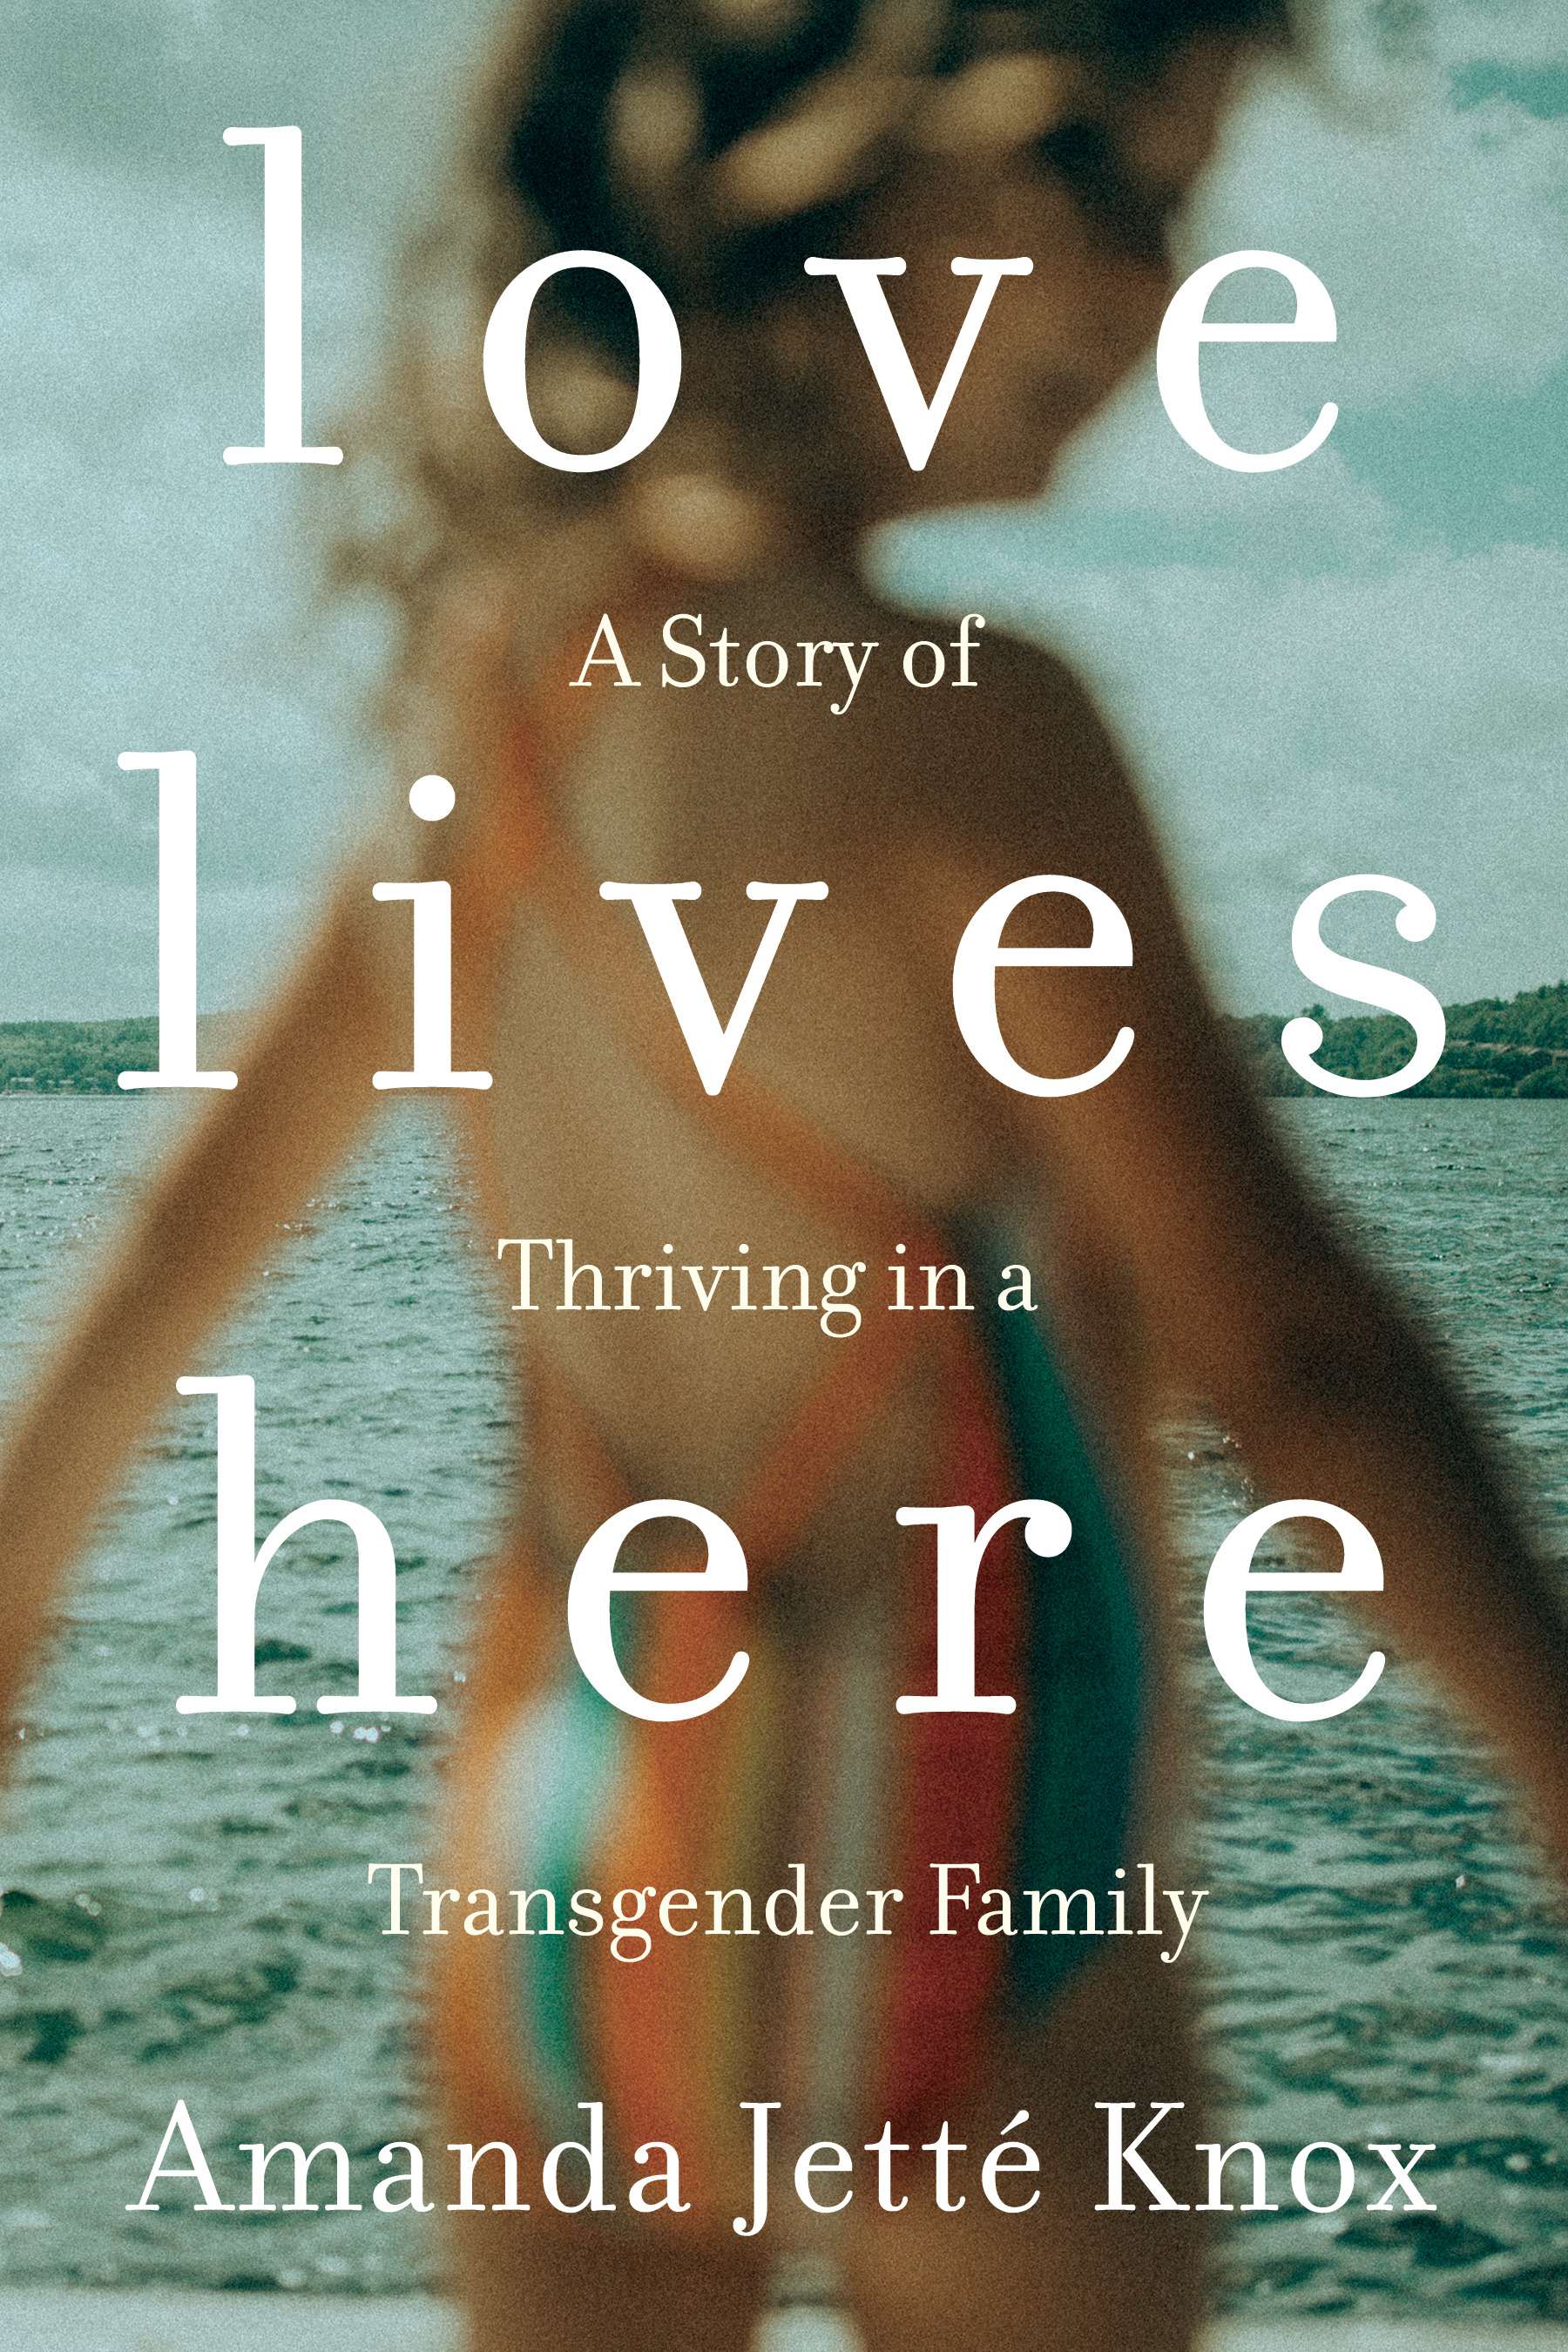 Love Lives Here : A Story of Thriving in a Transgender Family | Knox, Amanda Jette